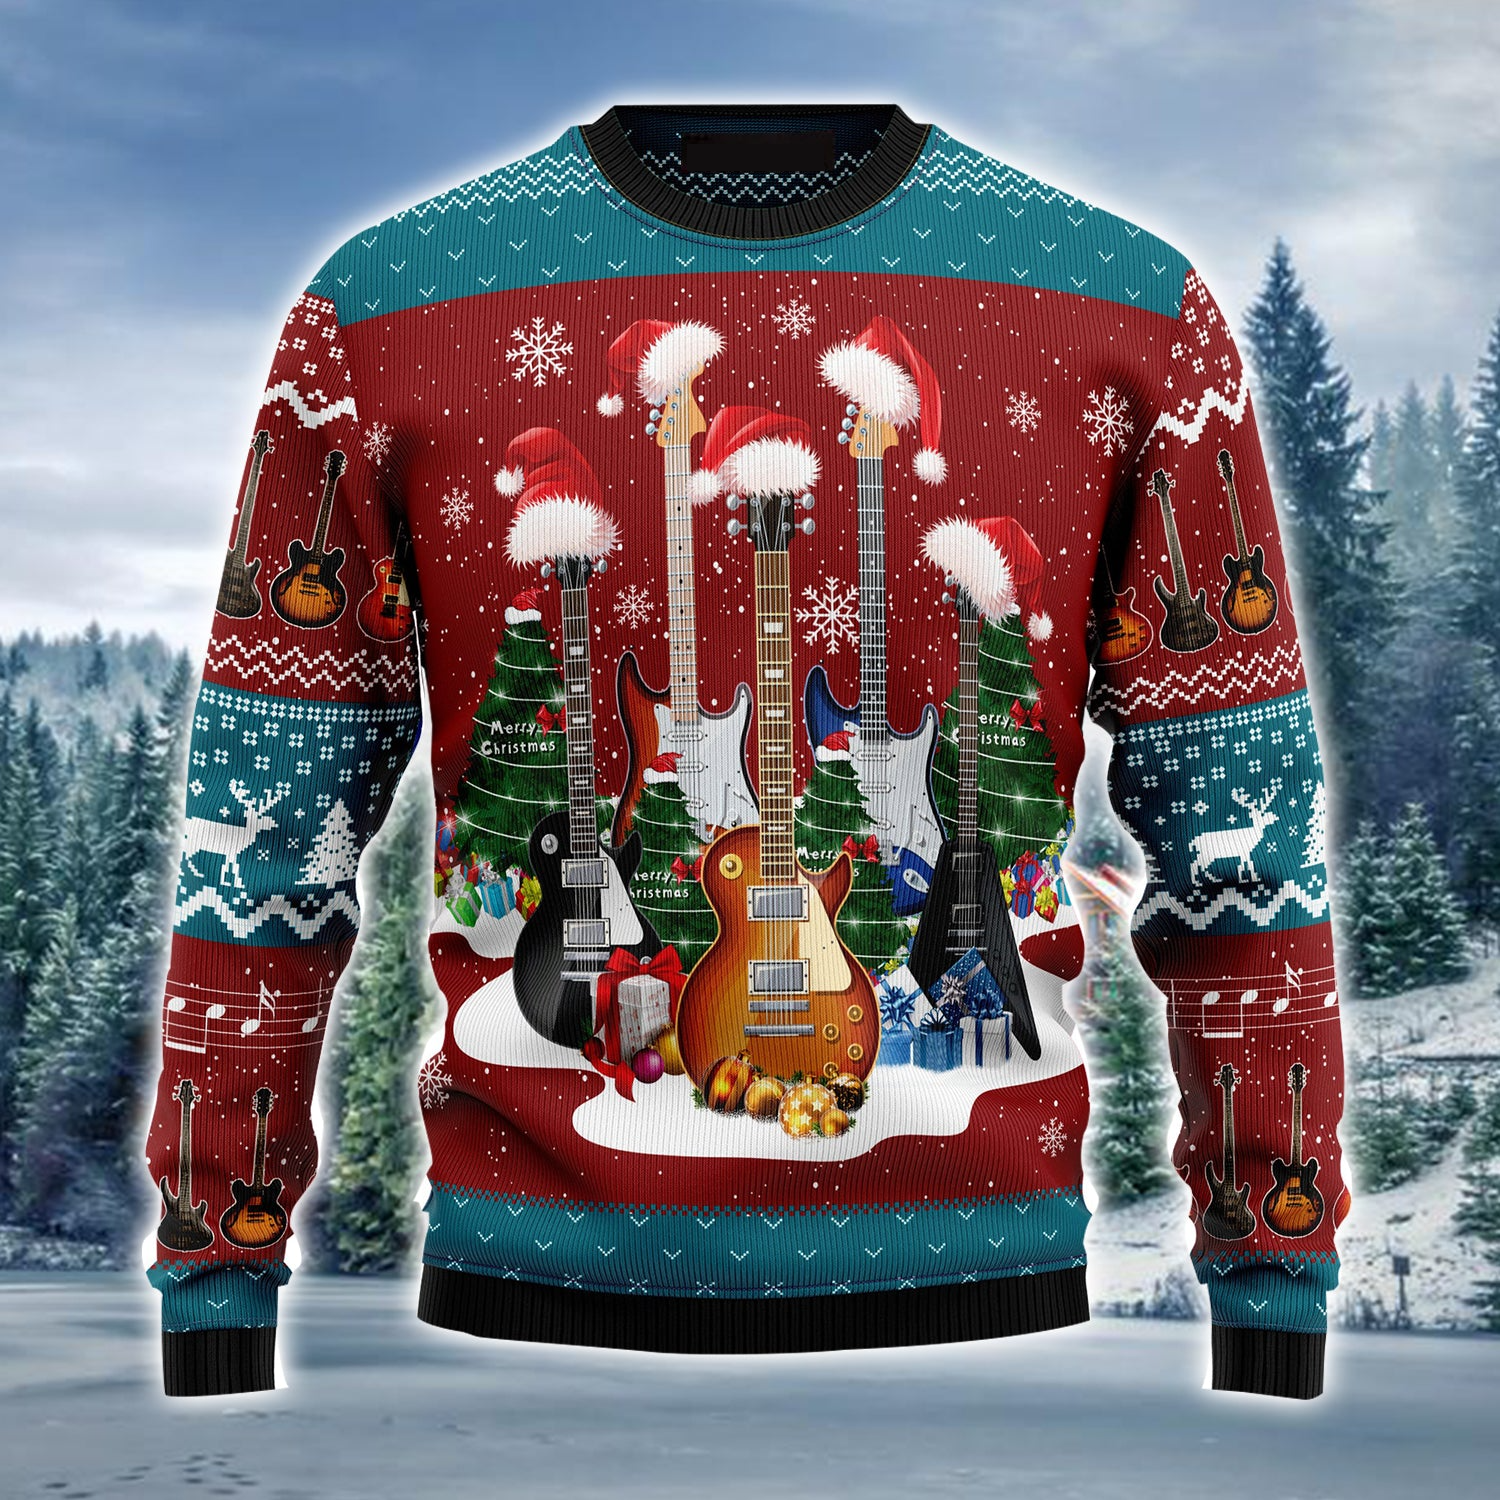 Guitar Christmas Tree & Snowflakes Pattern Ugly Sweater For Men & Women - Best Gift For Christmas/ Guitar Lovers